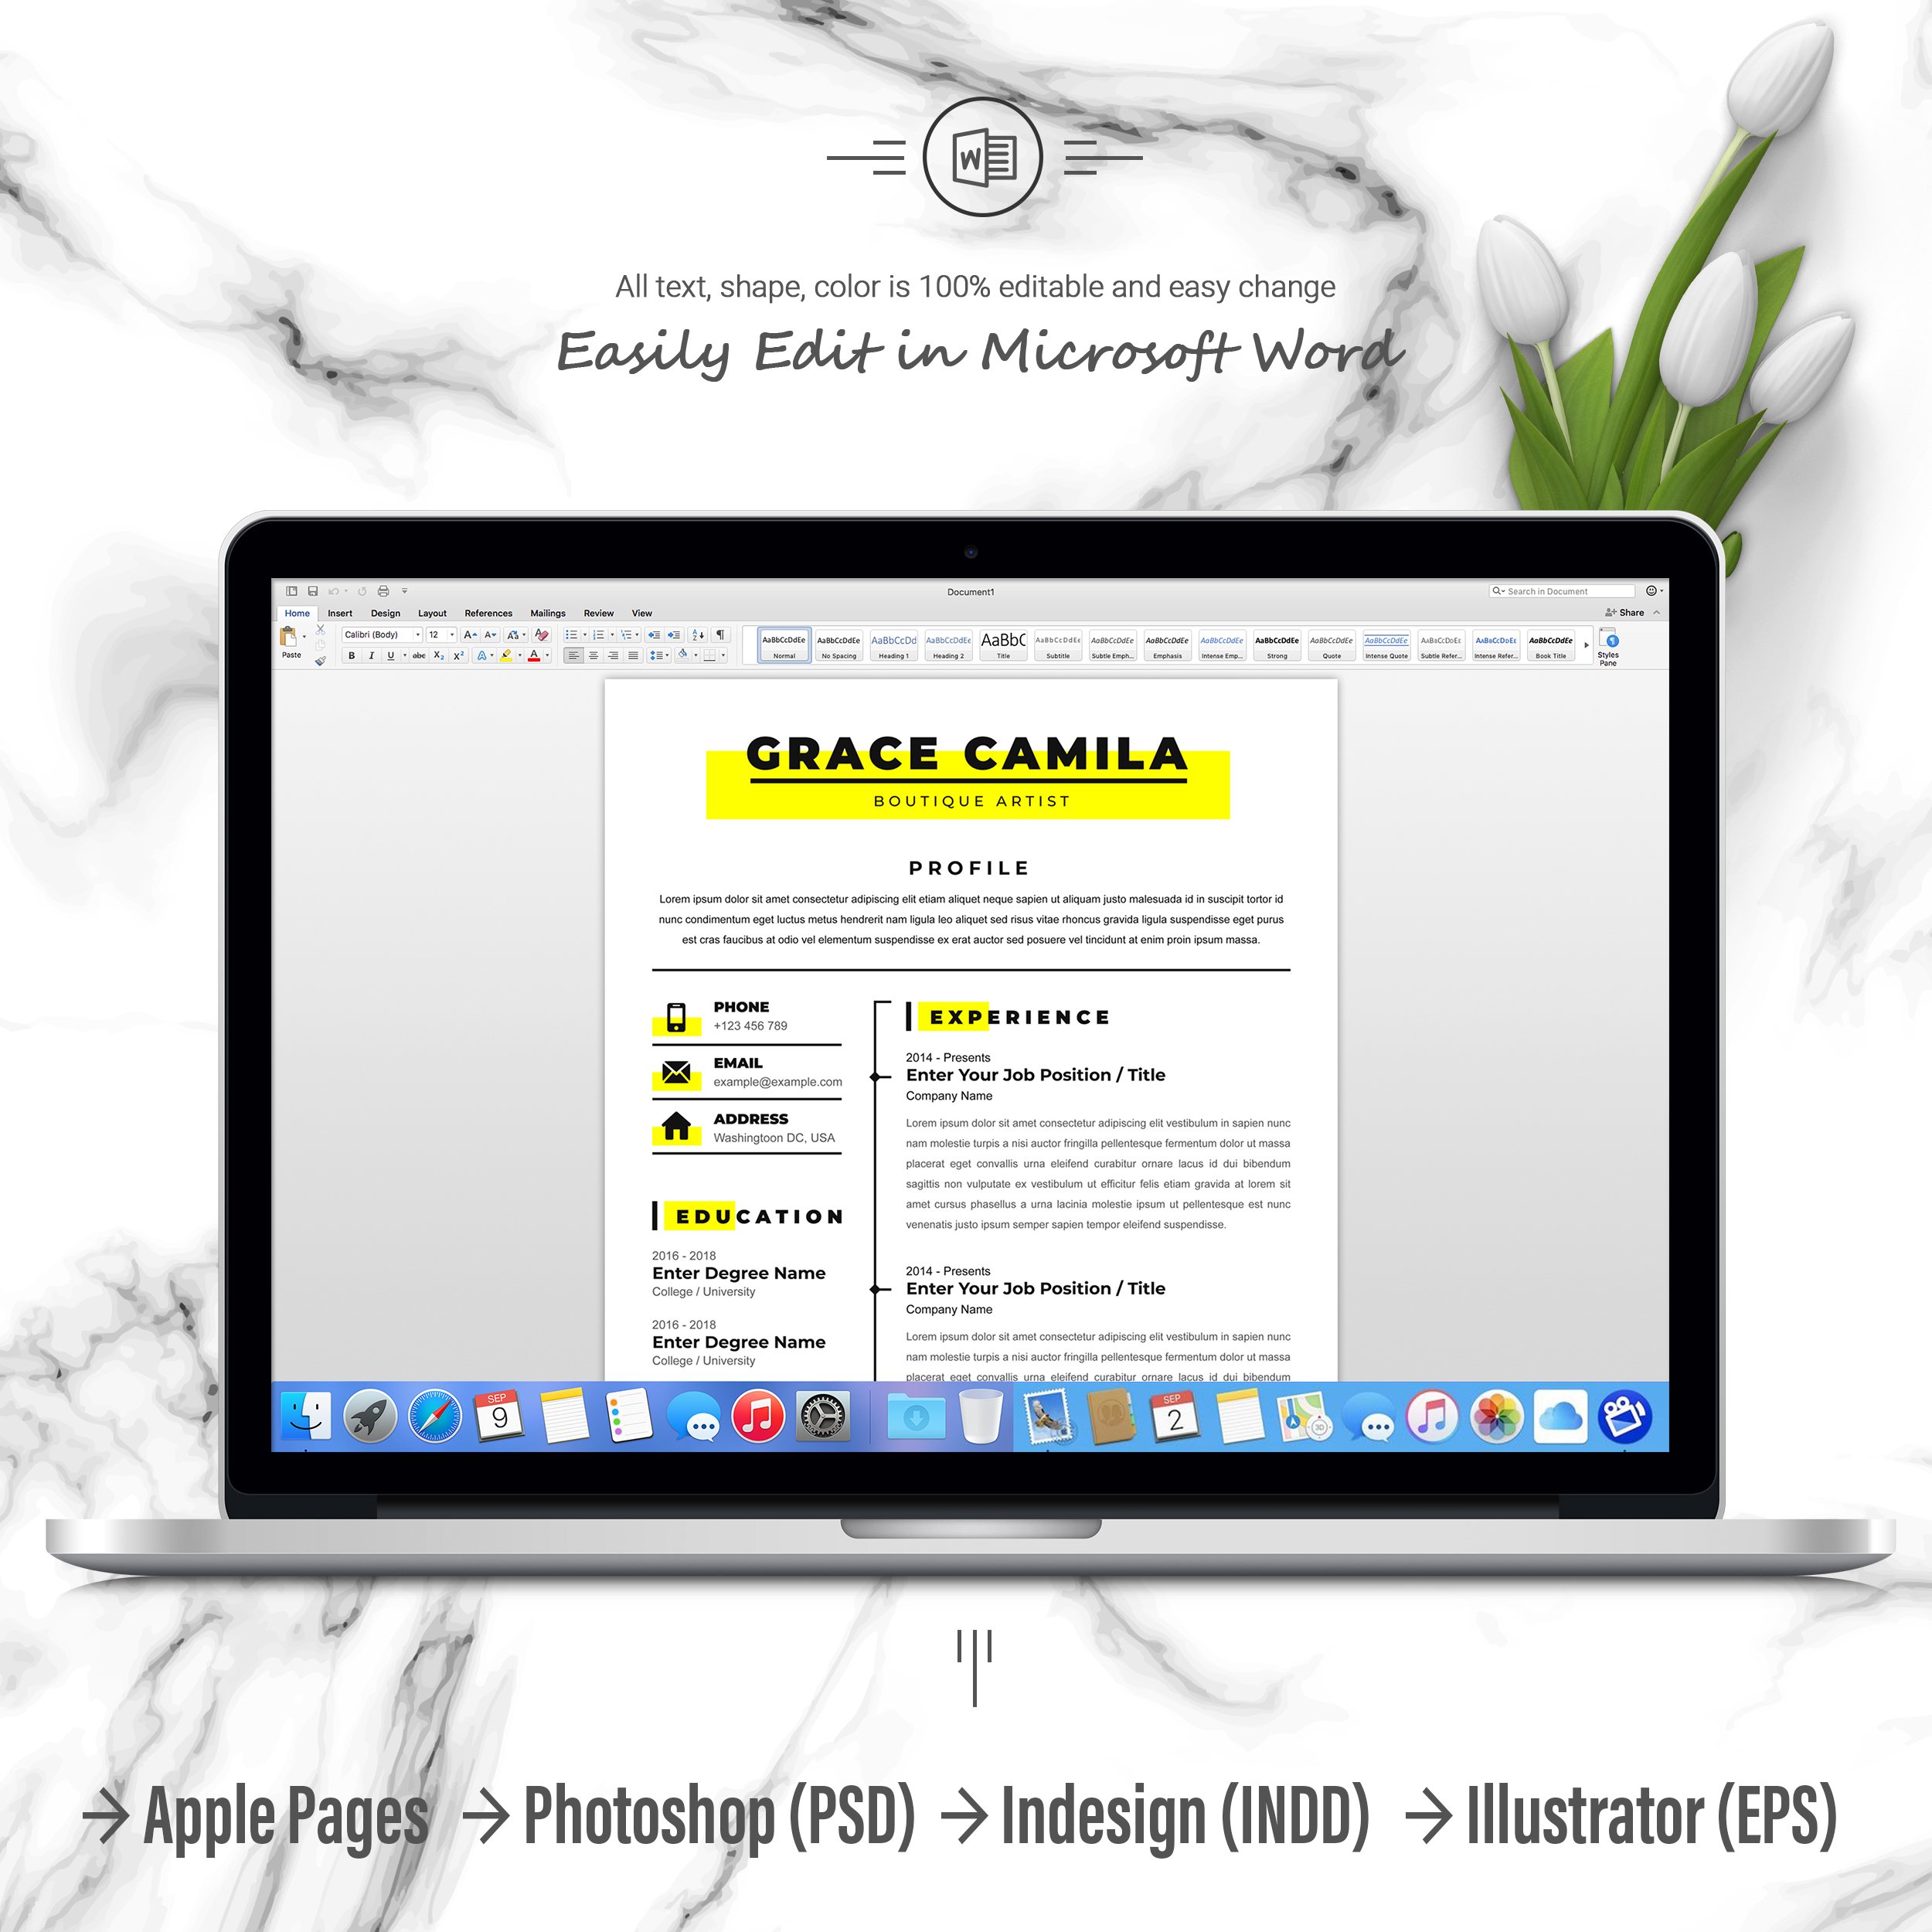 06 3 pages free resume ms word file format design template 936 1